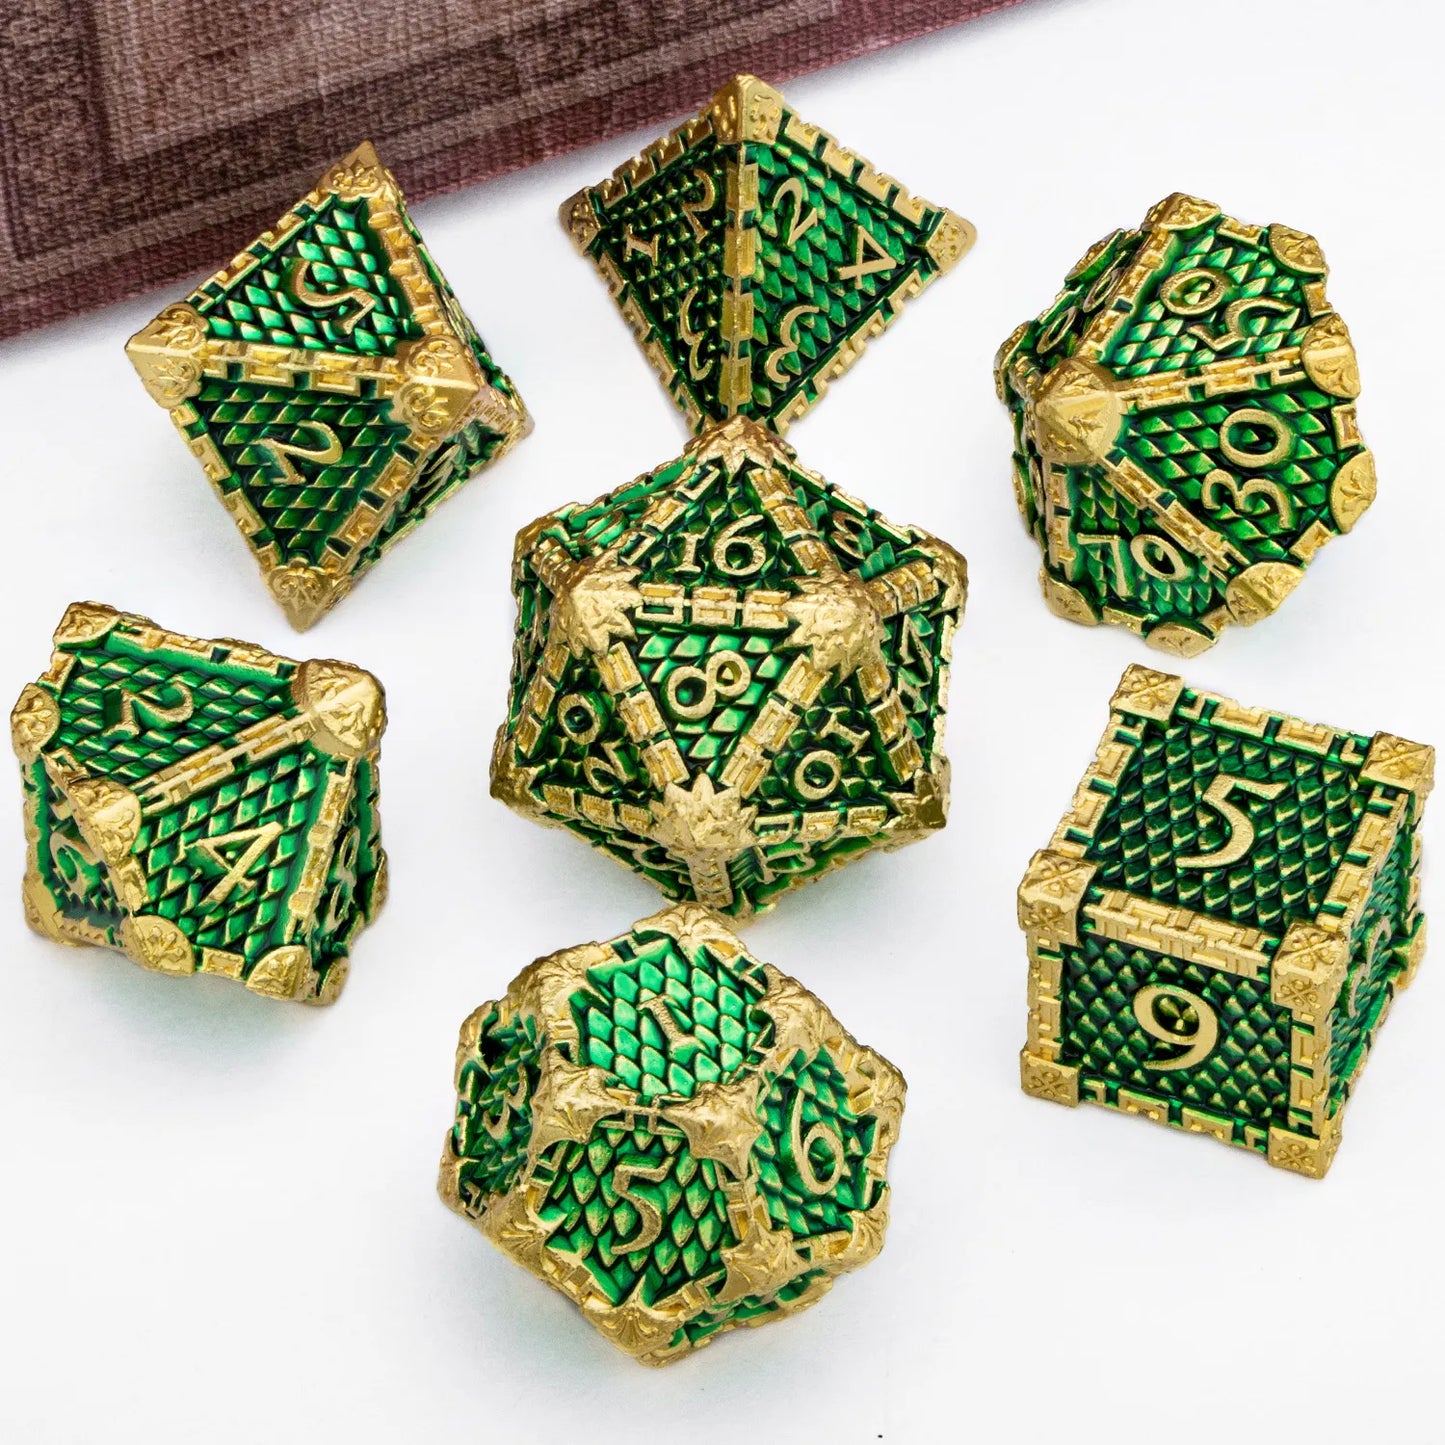 DND Metal Dice Set Dragon Scale D&D Dice Dungeon and Dragon Role Playing Games Black Green Polyhedral Dice RPG D and D Dice Golden Green